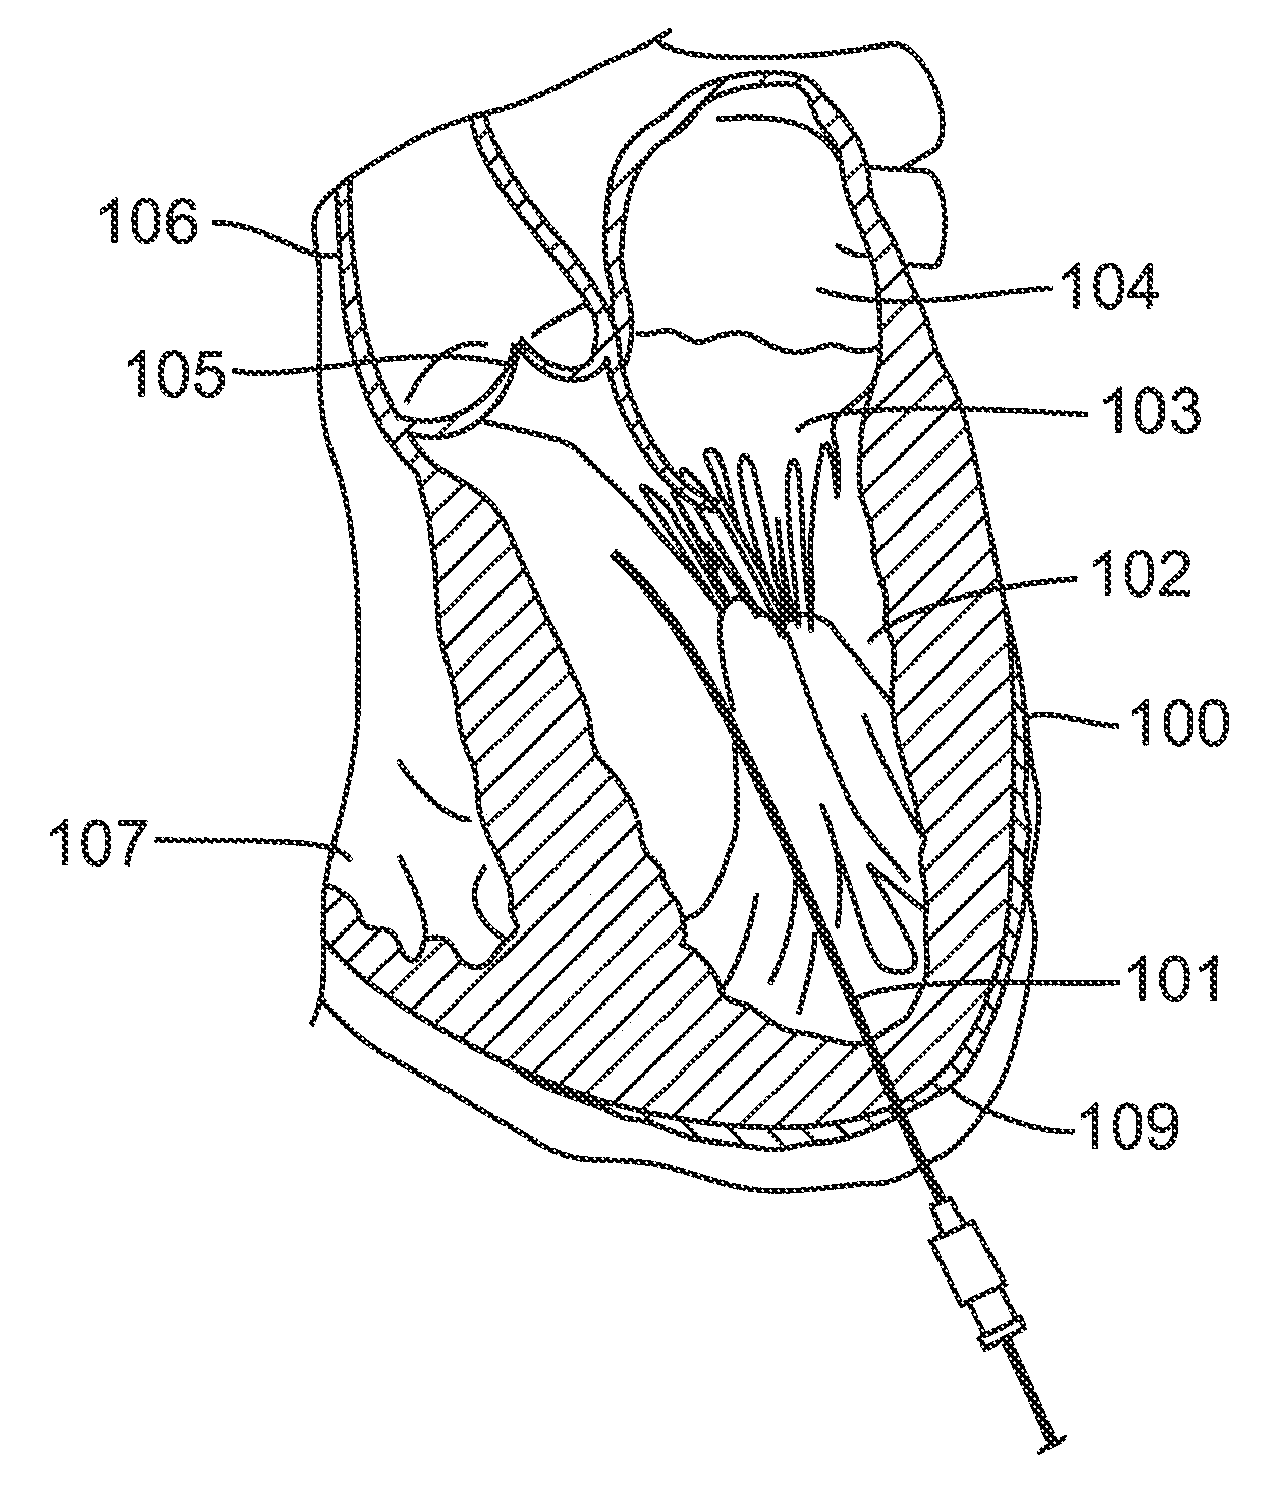 Percutaneous interventional cardiology system for treating valvular disease